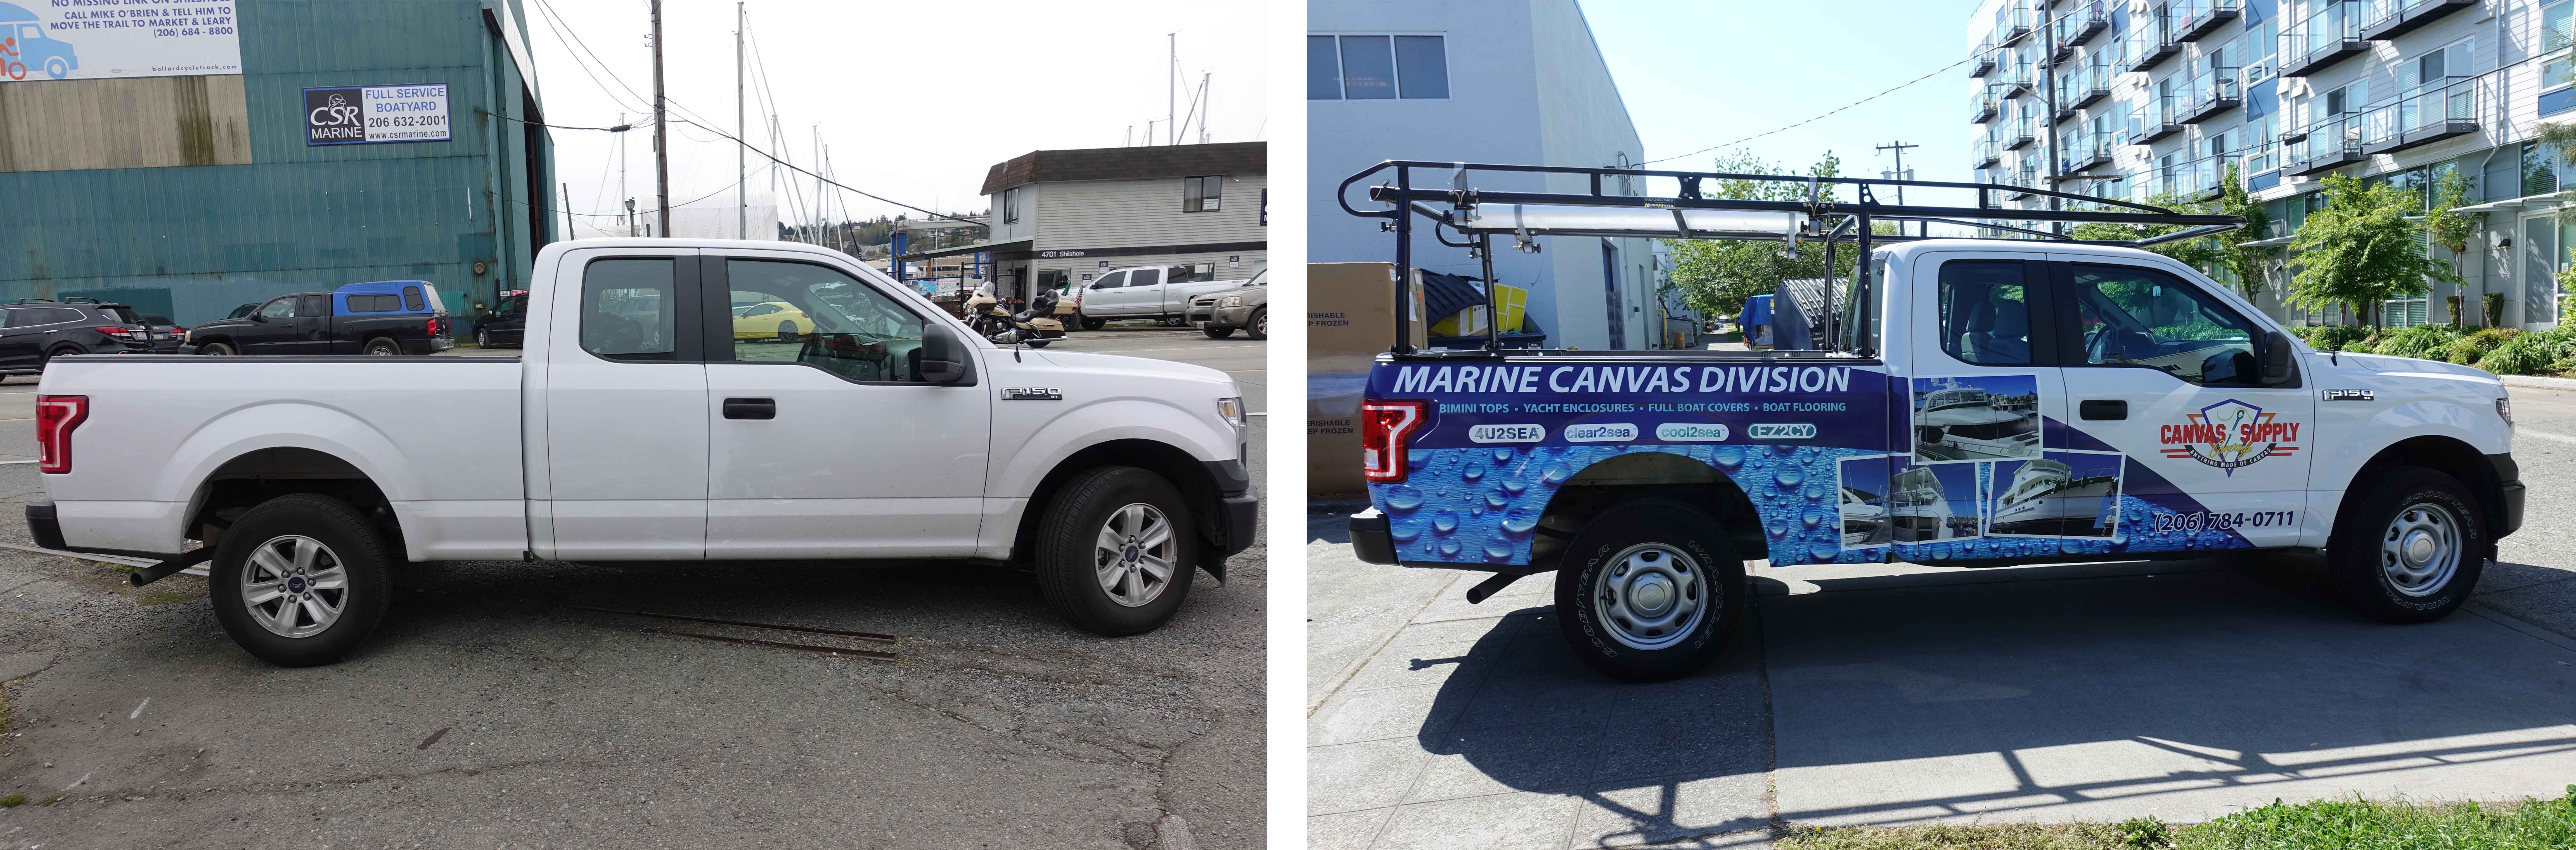 Before and After Side Views of White Truck with Digitally Printed Vehicle Graphics Advertizing Canvas Supply Awnings